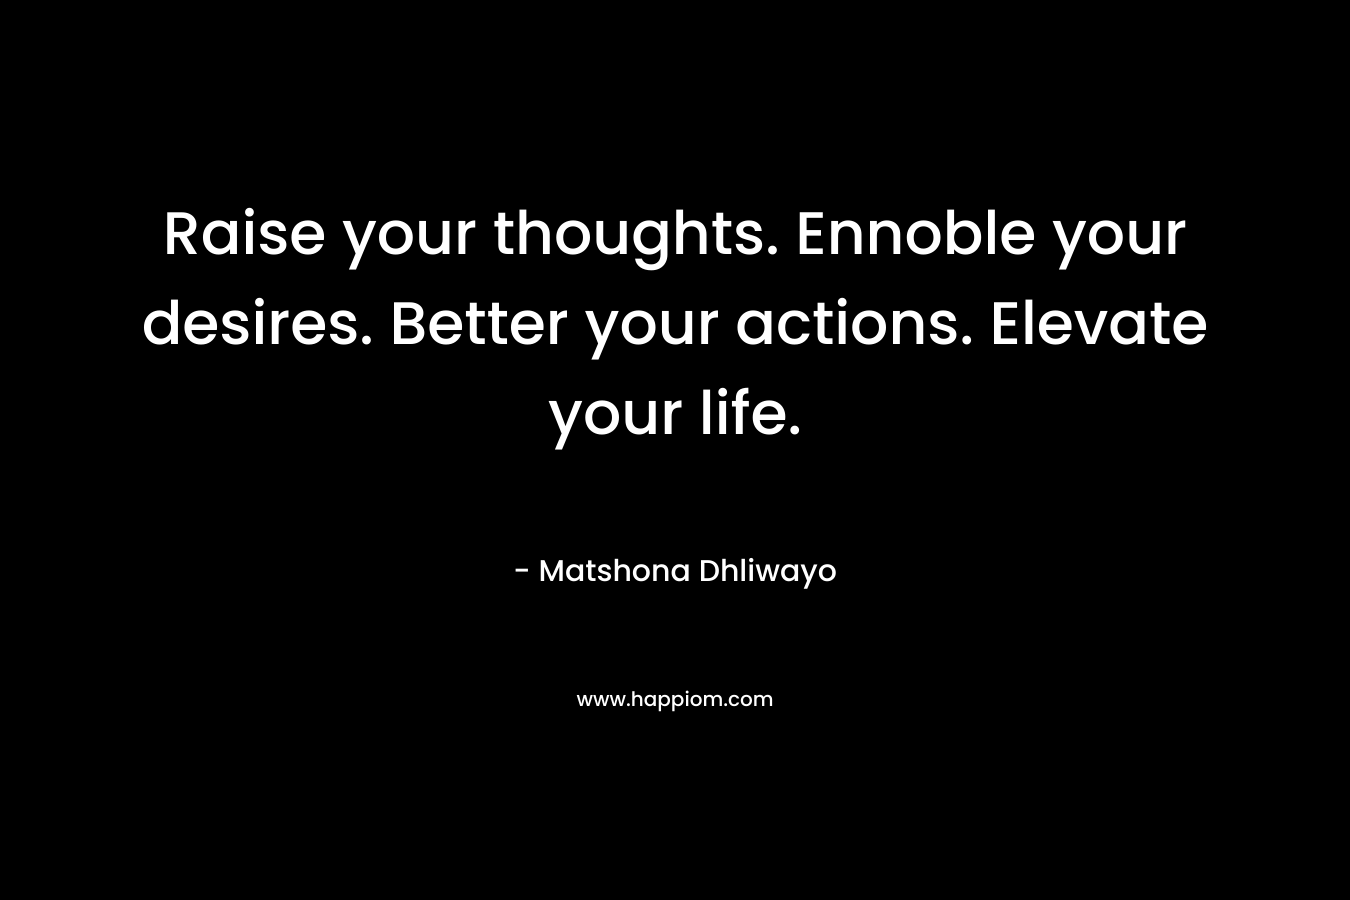 Raise your thoughts. Ennoble your desires. Better your actions. Elevate your life.